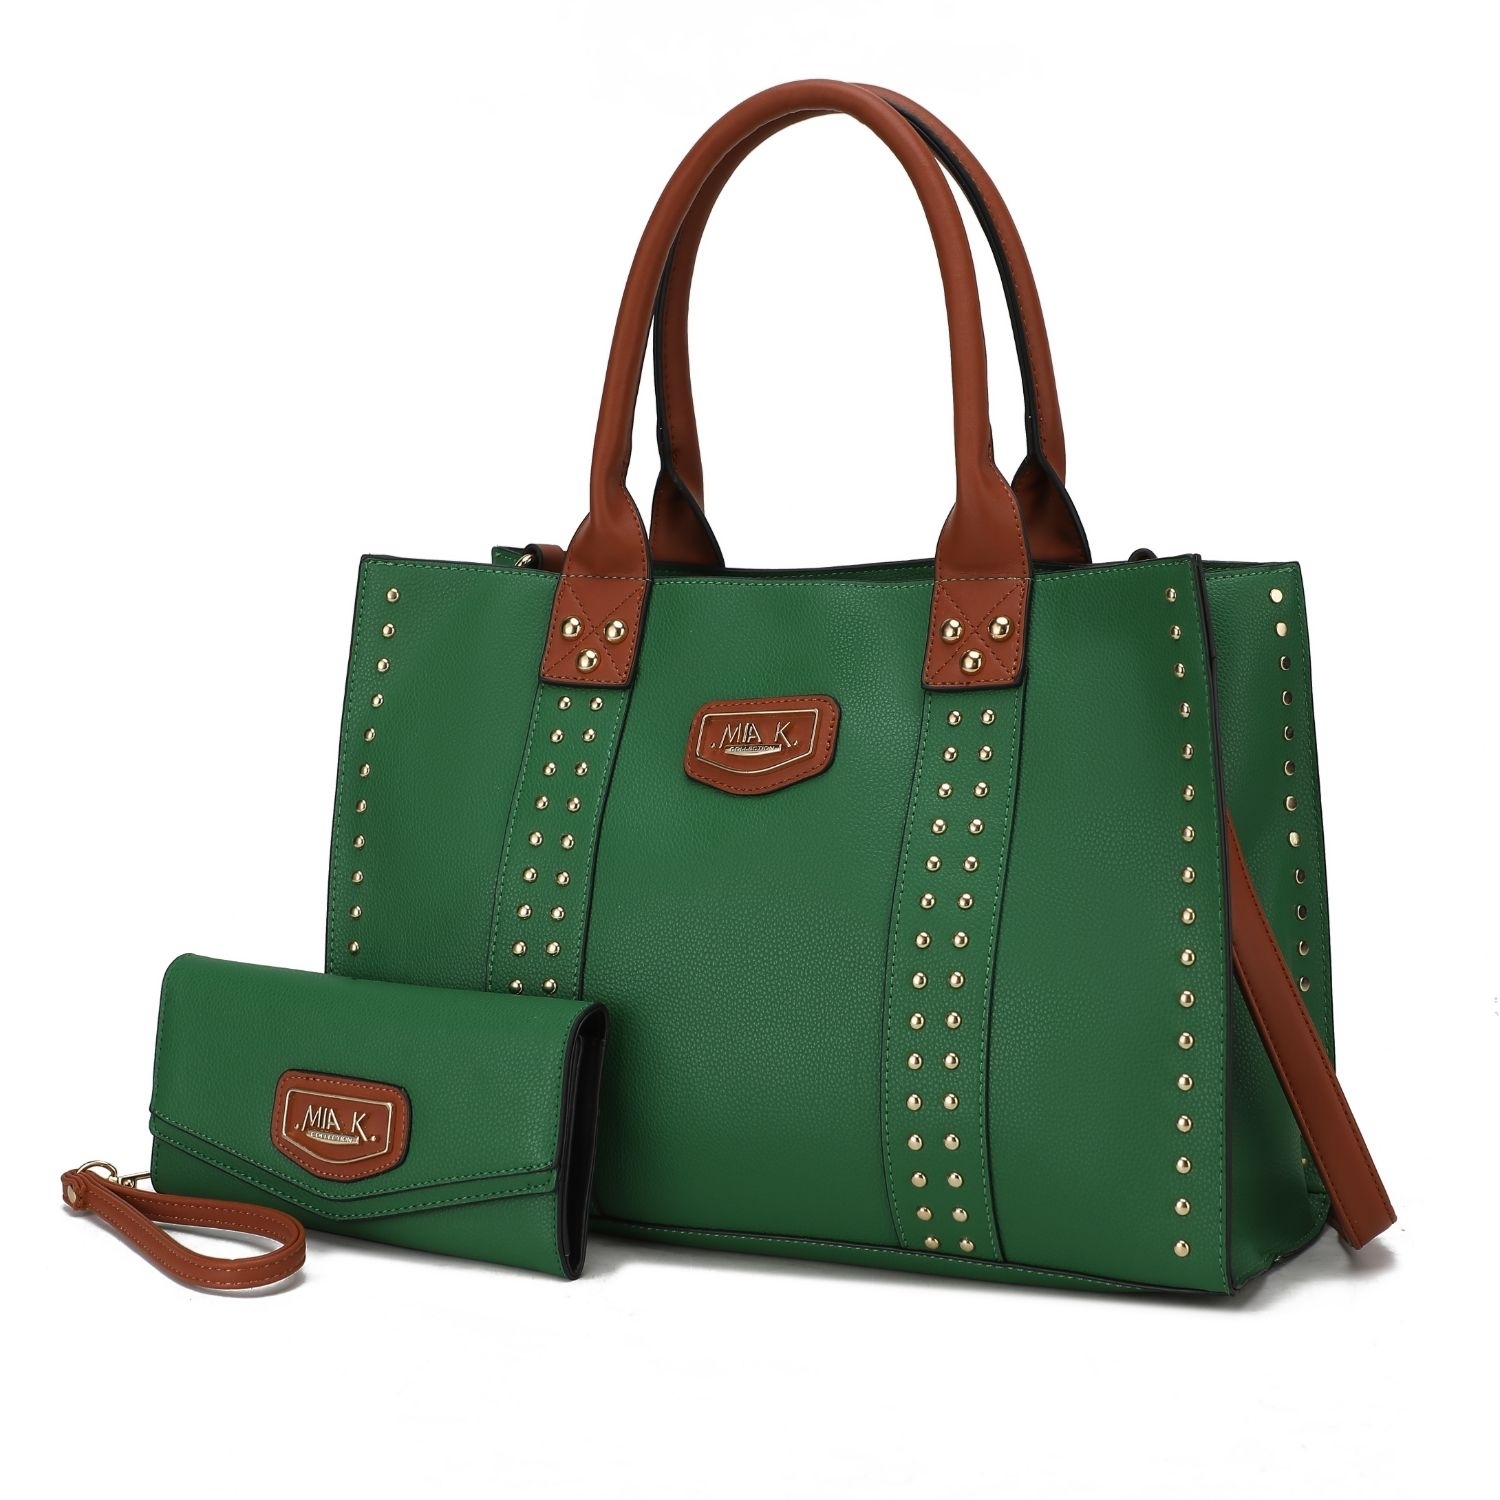 MKF Collection Davina Vegan Leather Women's Tote Bag By Mia K With Wallet -2 Pieces - Green